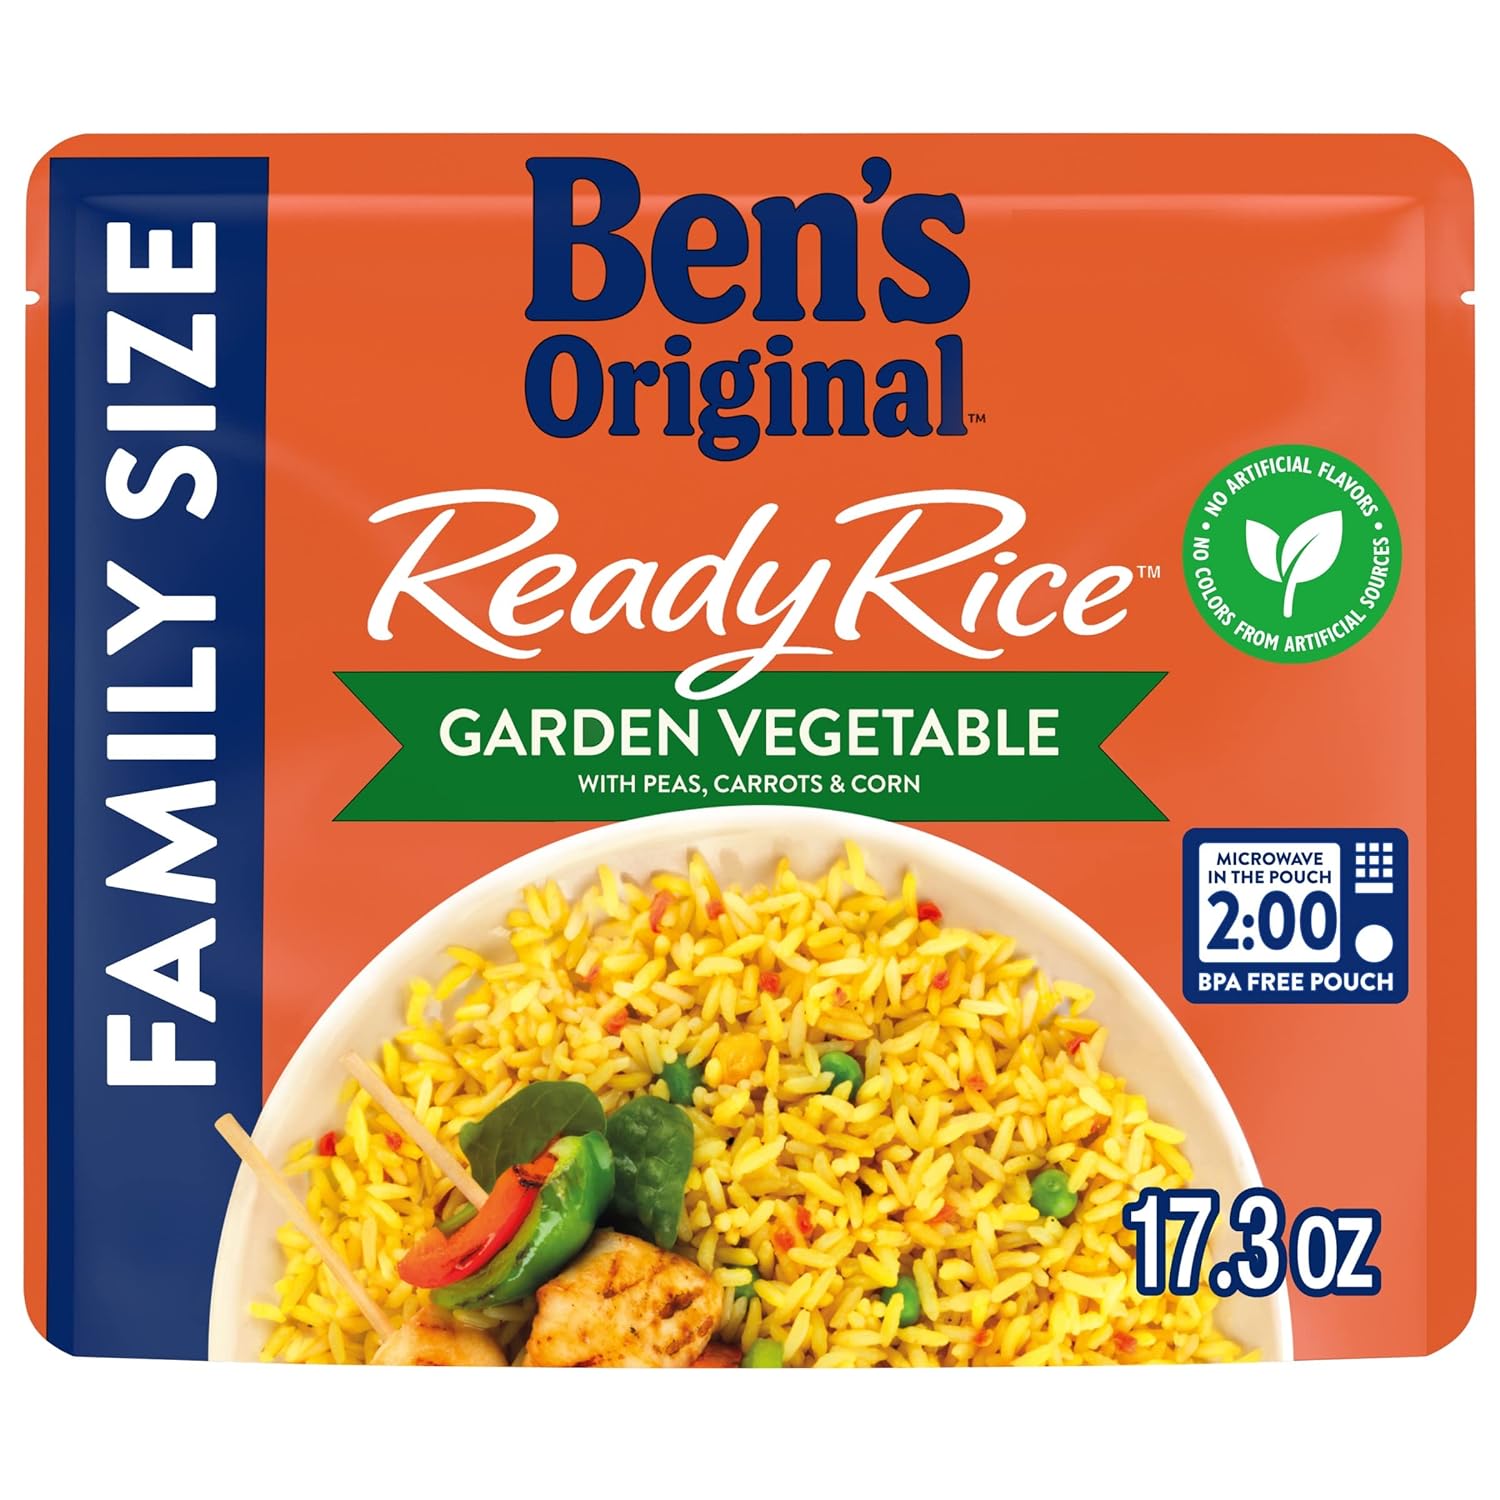 BEN'S ORIGINAL READY RICE Garden Vegetable Medley Flavored Rice, Family Size, 17.3 OZ Pouch (Pack of 6)